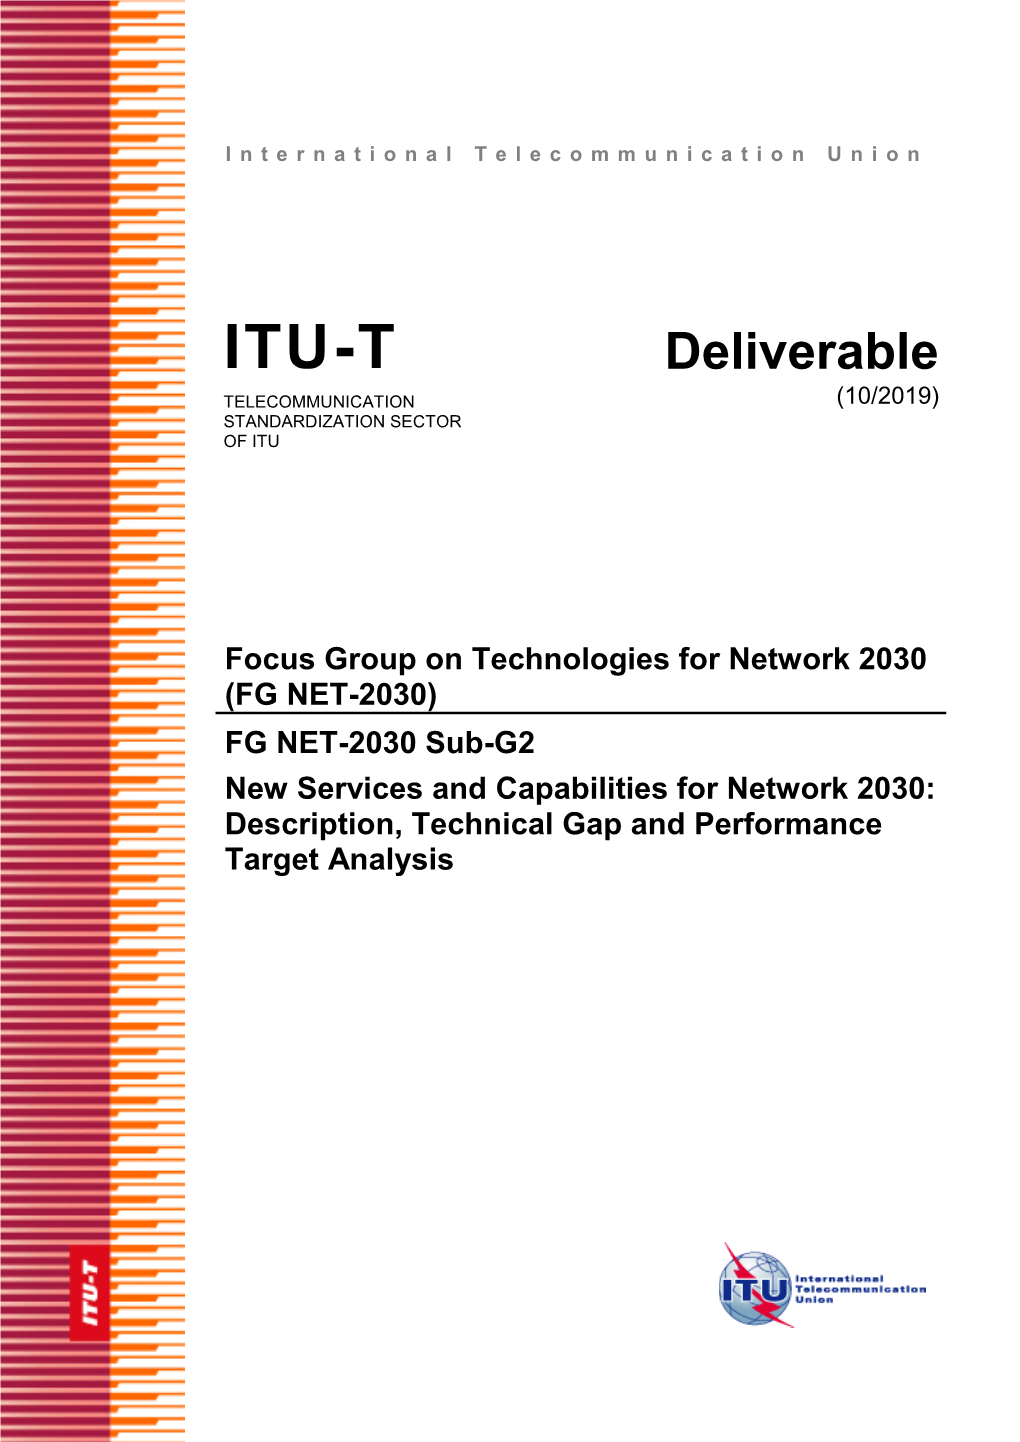 ITU-T Rec. Y.3172 (06/2019) Architectural Framework for Machine Learning in Future Networks Including IMT-2020